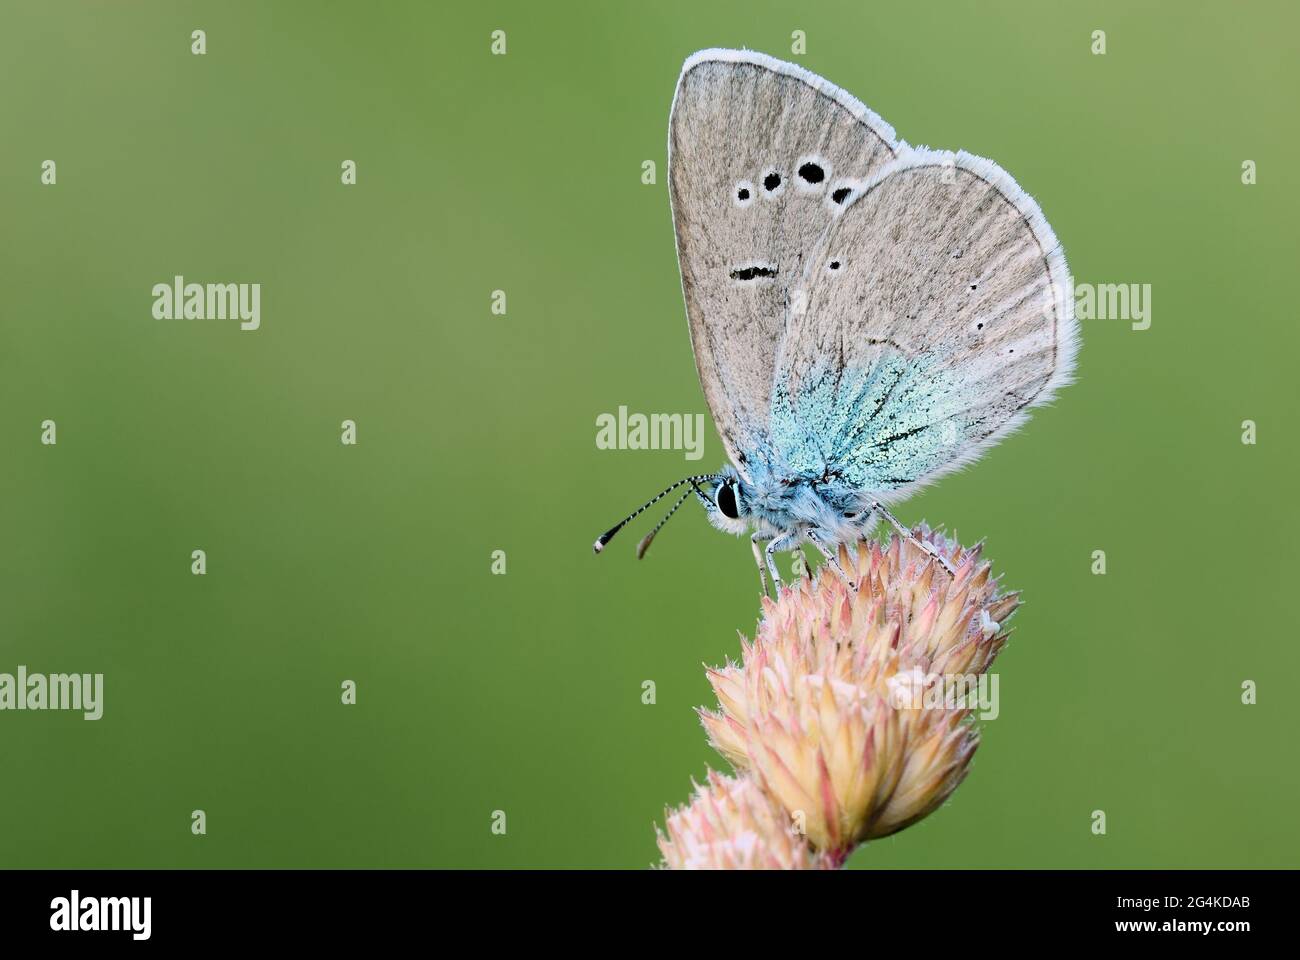 Large Blue butterfly sitting on colorful meadow grass. Side view, close up. Blurred natural green background. Genus species Maculinea arion. Stock Photo